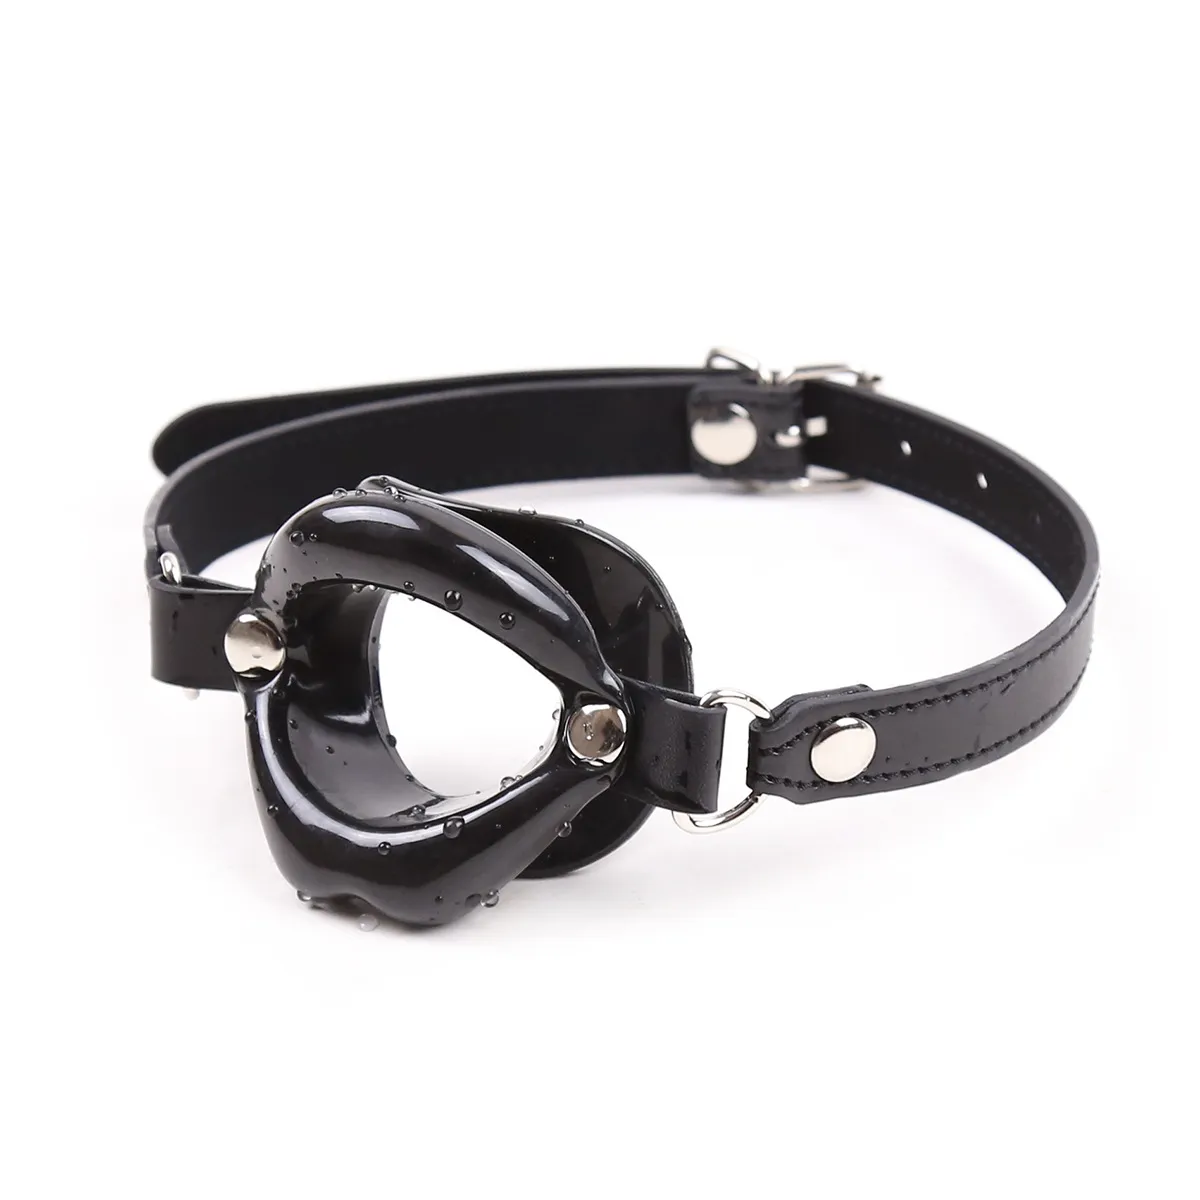 New Erotic Toys Slave bdsm Bondage Strap Lips O Ring Gag, Fetish Silicone Open Mouth Gag, Blowjob Adult Sex toys for Couples